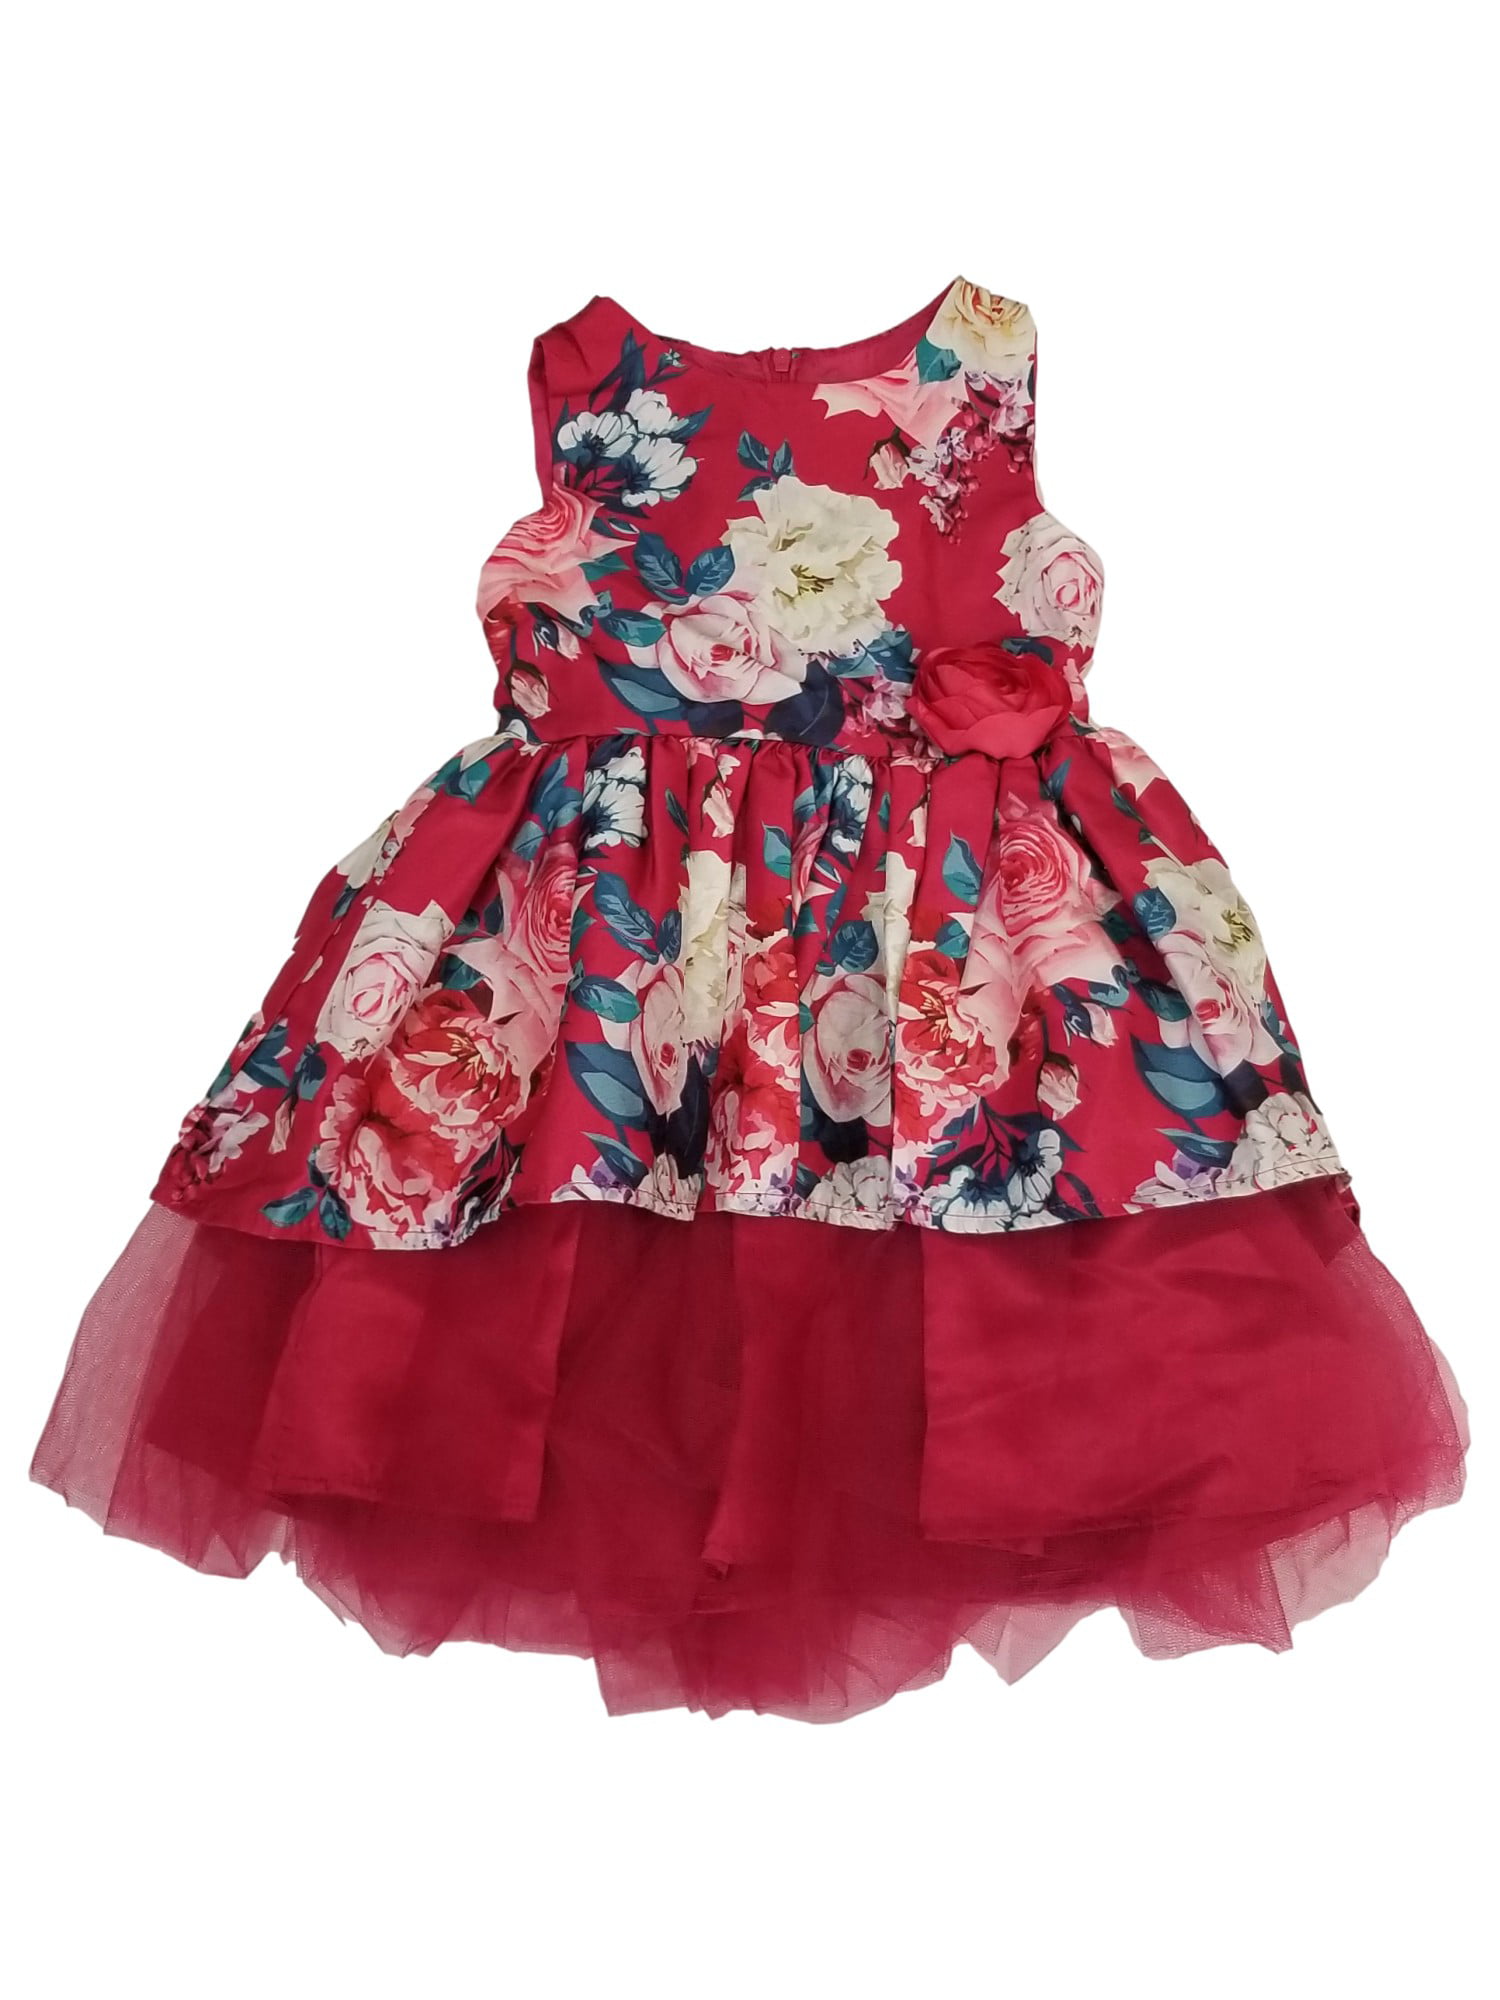 NWT Christmas Holiday Ornaments Girls Red Gold Ruffle Dress 2T 3T 4T 